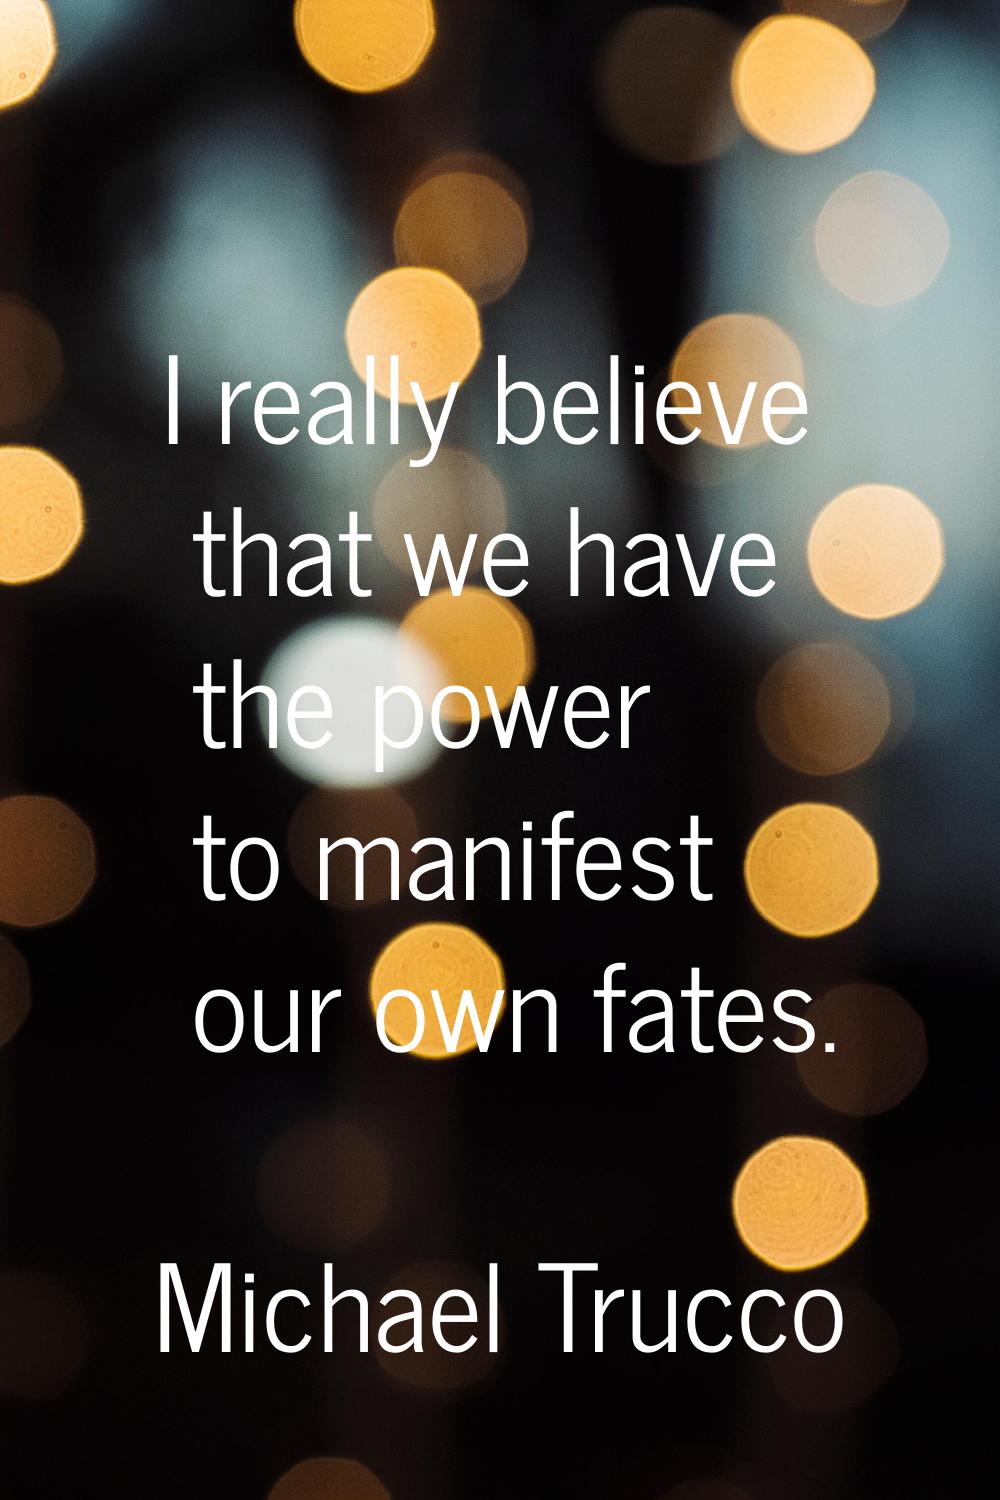 I really believe that we have the power to manifest our own fates.